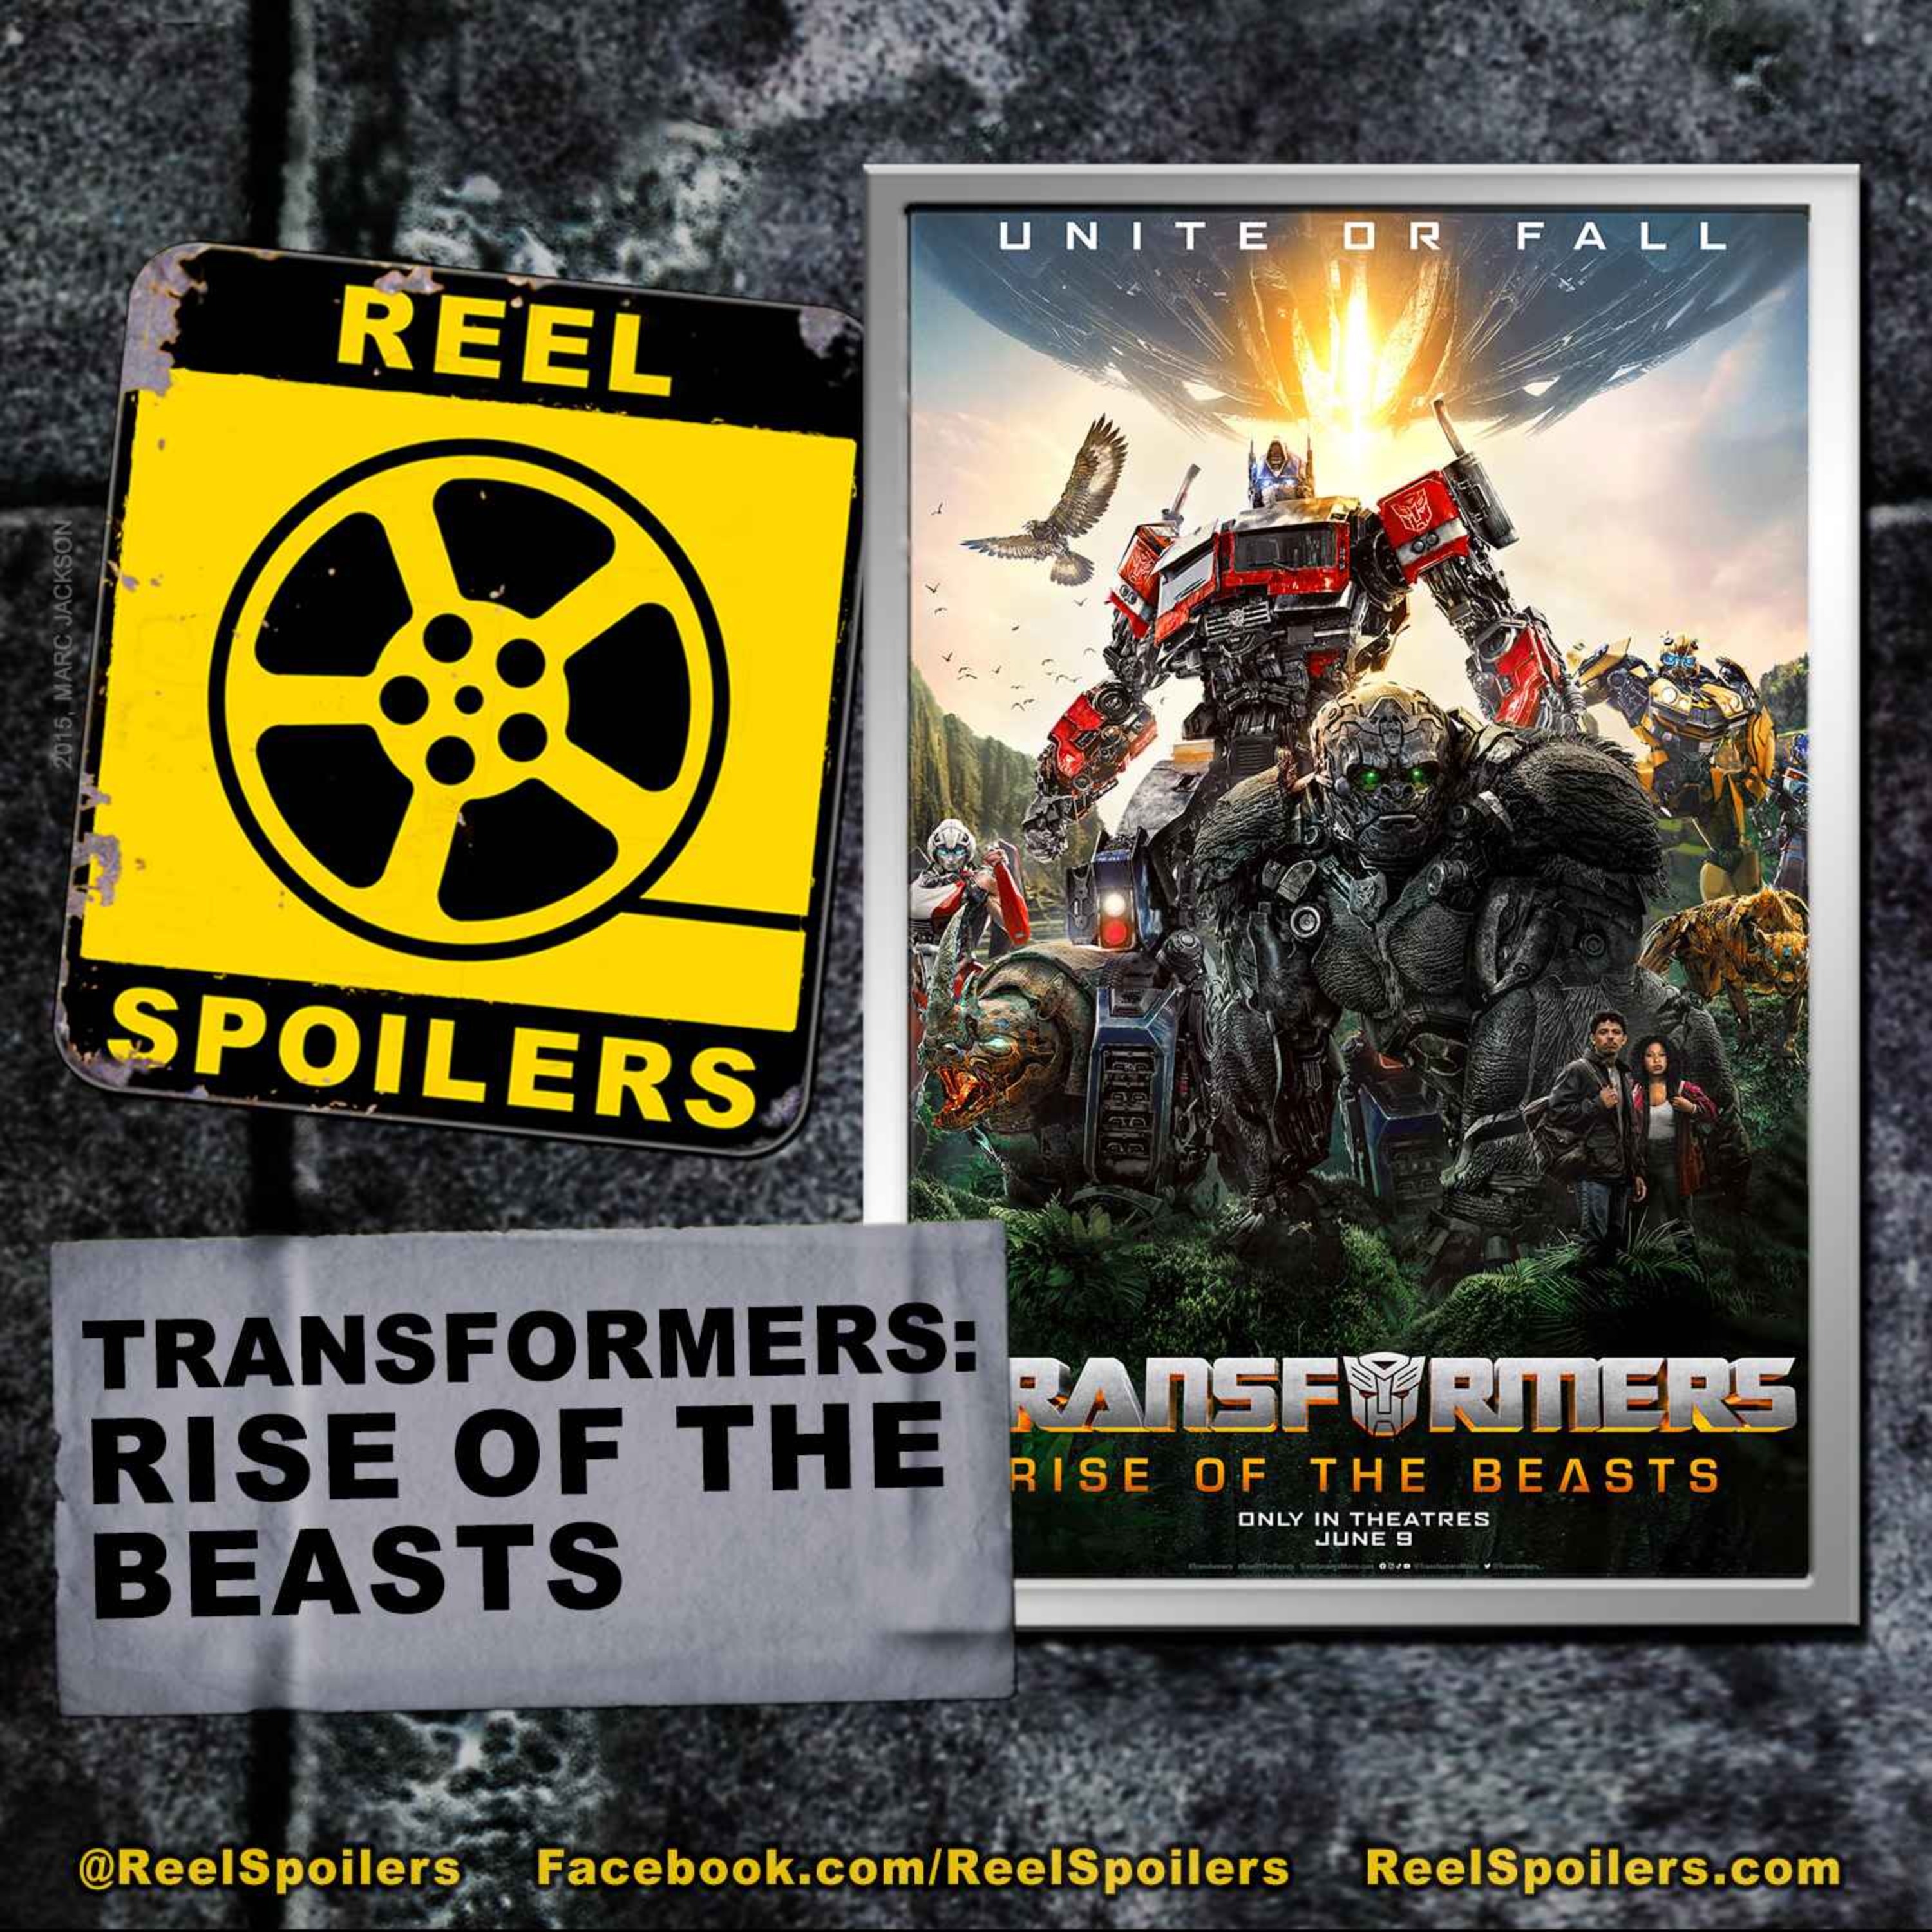 TRANSFORMERS: RISE OF THE BEASTS Starring Anthony Ramos, Dominique Fishback, Peter Cullen